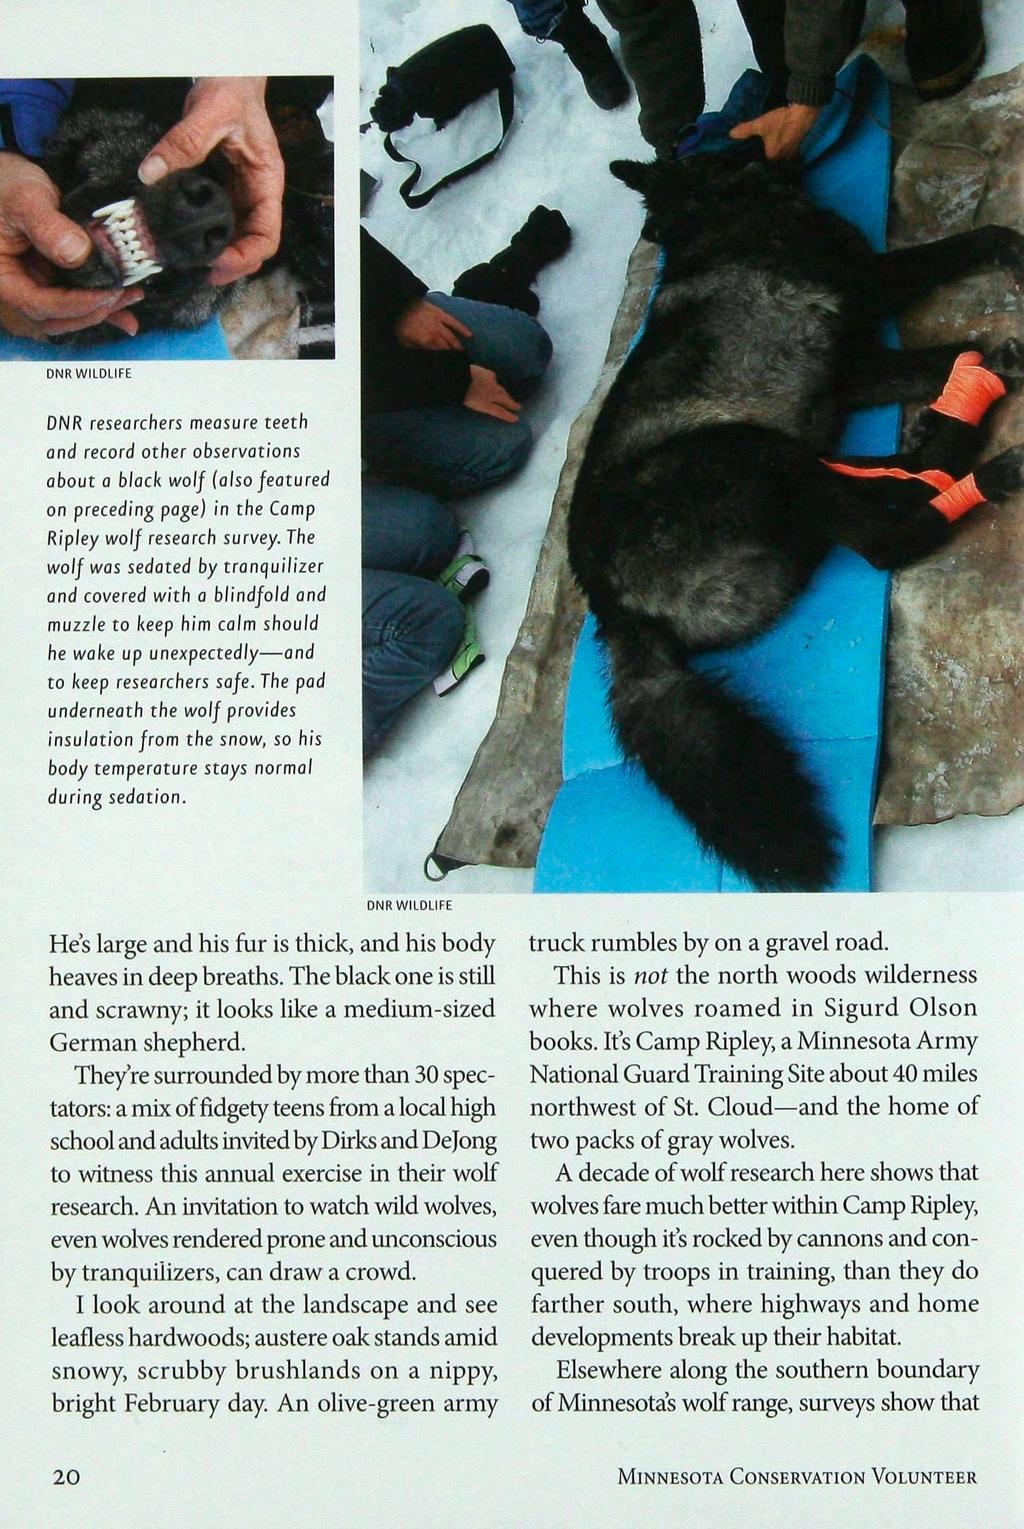 DNR WILDLIFE DNR researchers measure teeth and record other observations about a black wolf (also featured on preceding page) in the Camp Rip ley wolf research survey.